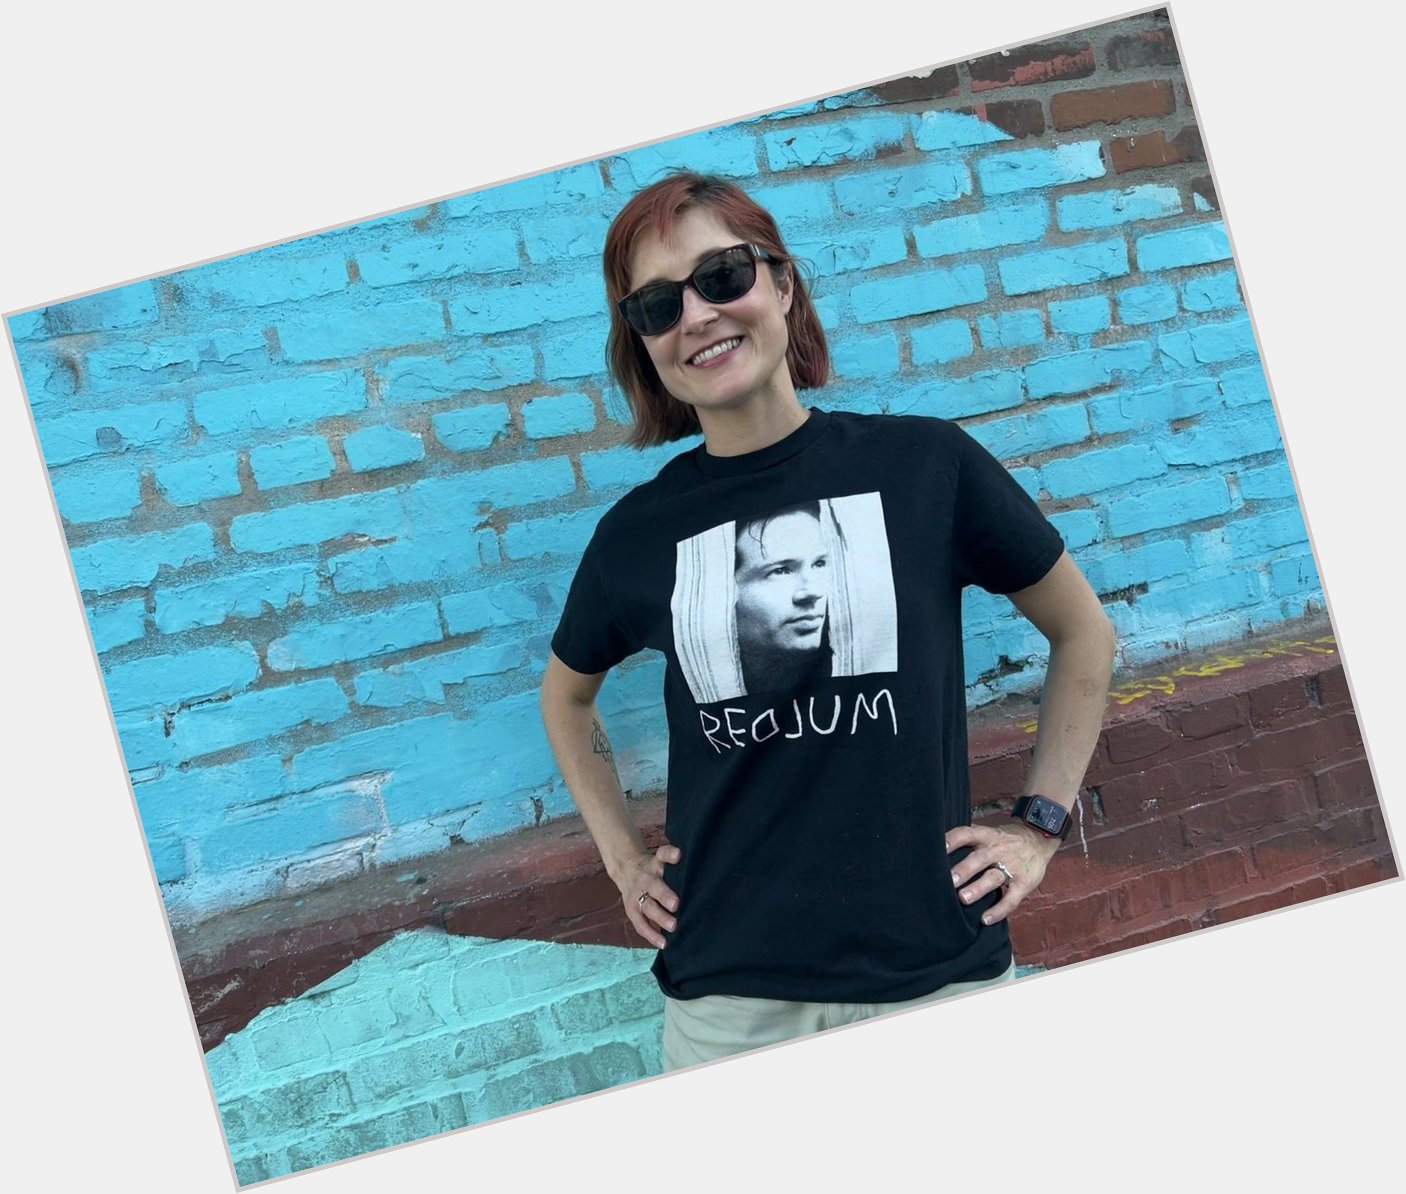 Wearing the new shirt got me in honor of David Duchovny s birthday today! Happy birthday, 